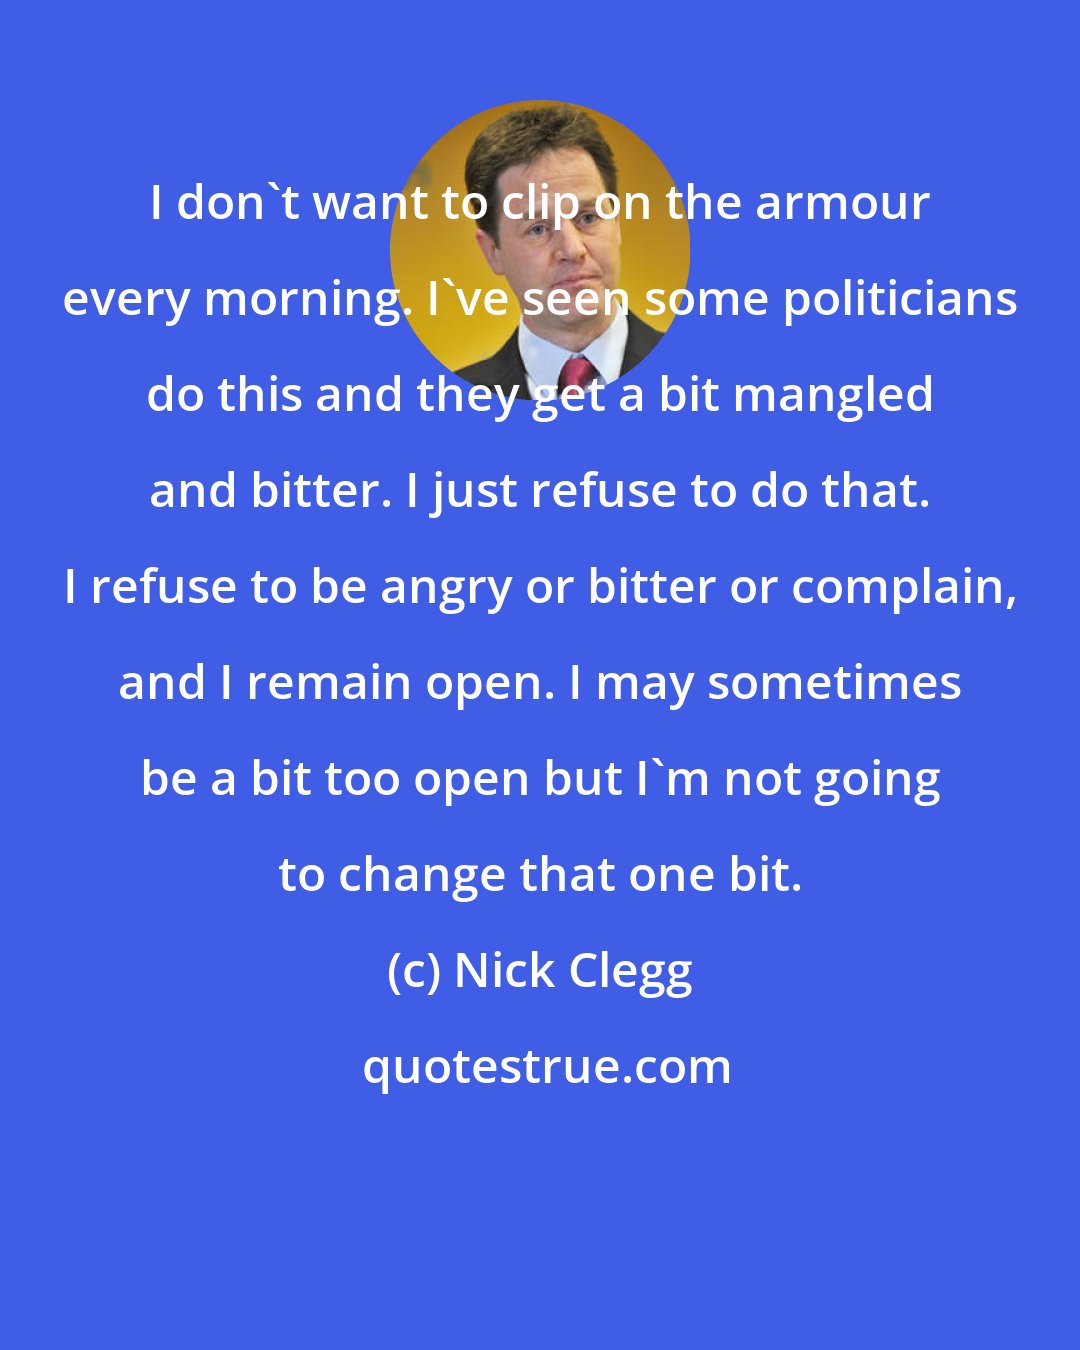 Nick Clegg: I don't want to clip on the armour every morning. I've seen some politicians do this and they get a bit mangled and bitter. I just refuse to do that. I refuse to be angry or bitter or complain, and I remain open. I may sometimes be a bit too open but I'm not going to change that one bit.